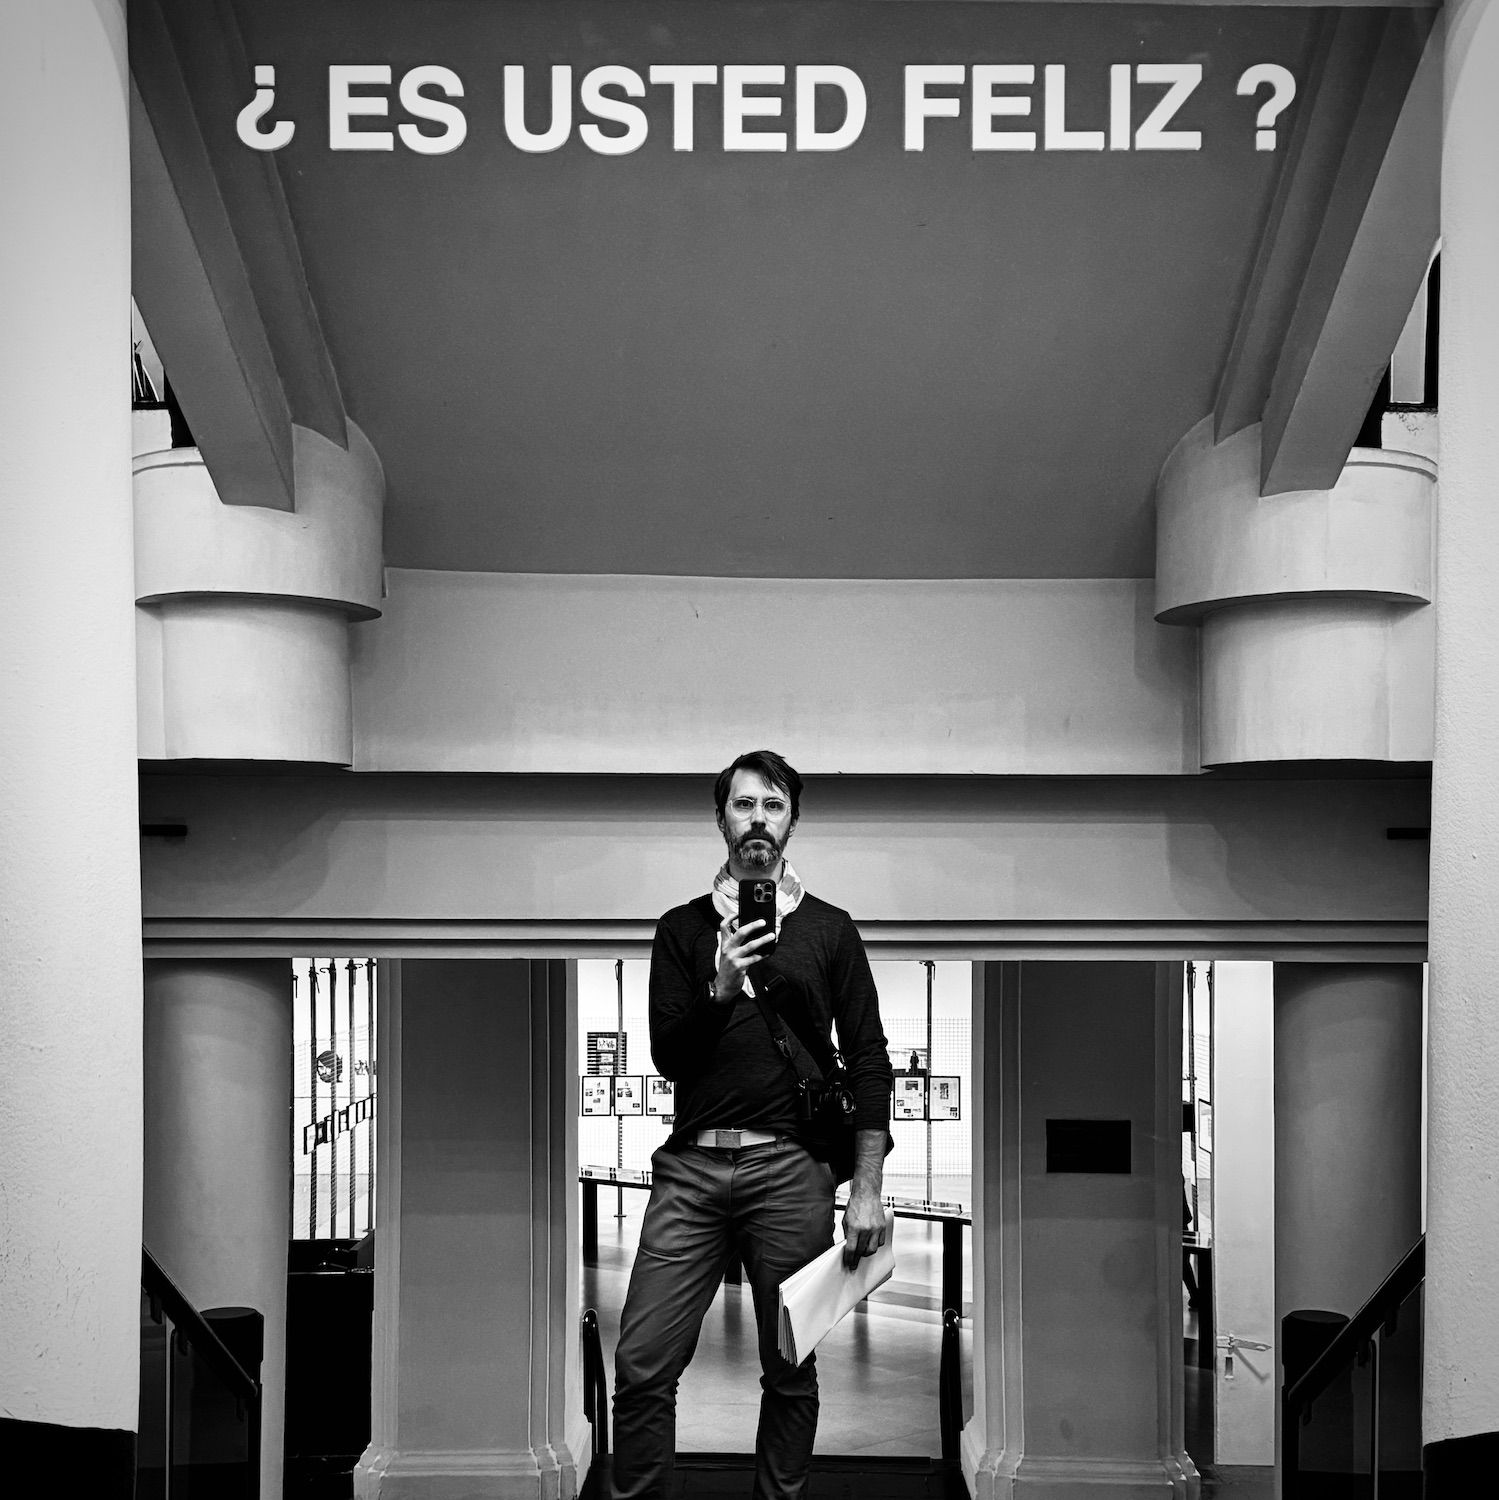 self portrait of james williams in a mirror with the text ¿es usted feliz? at the top